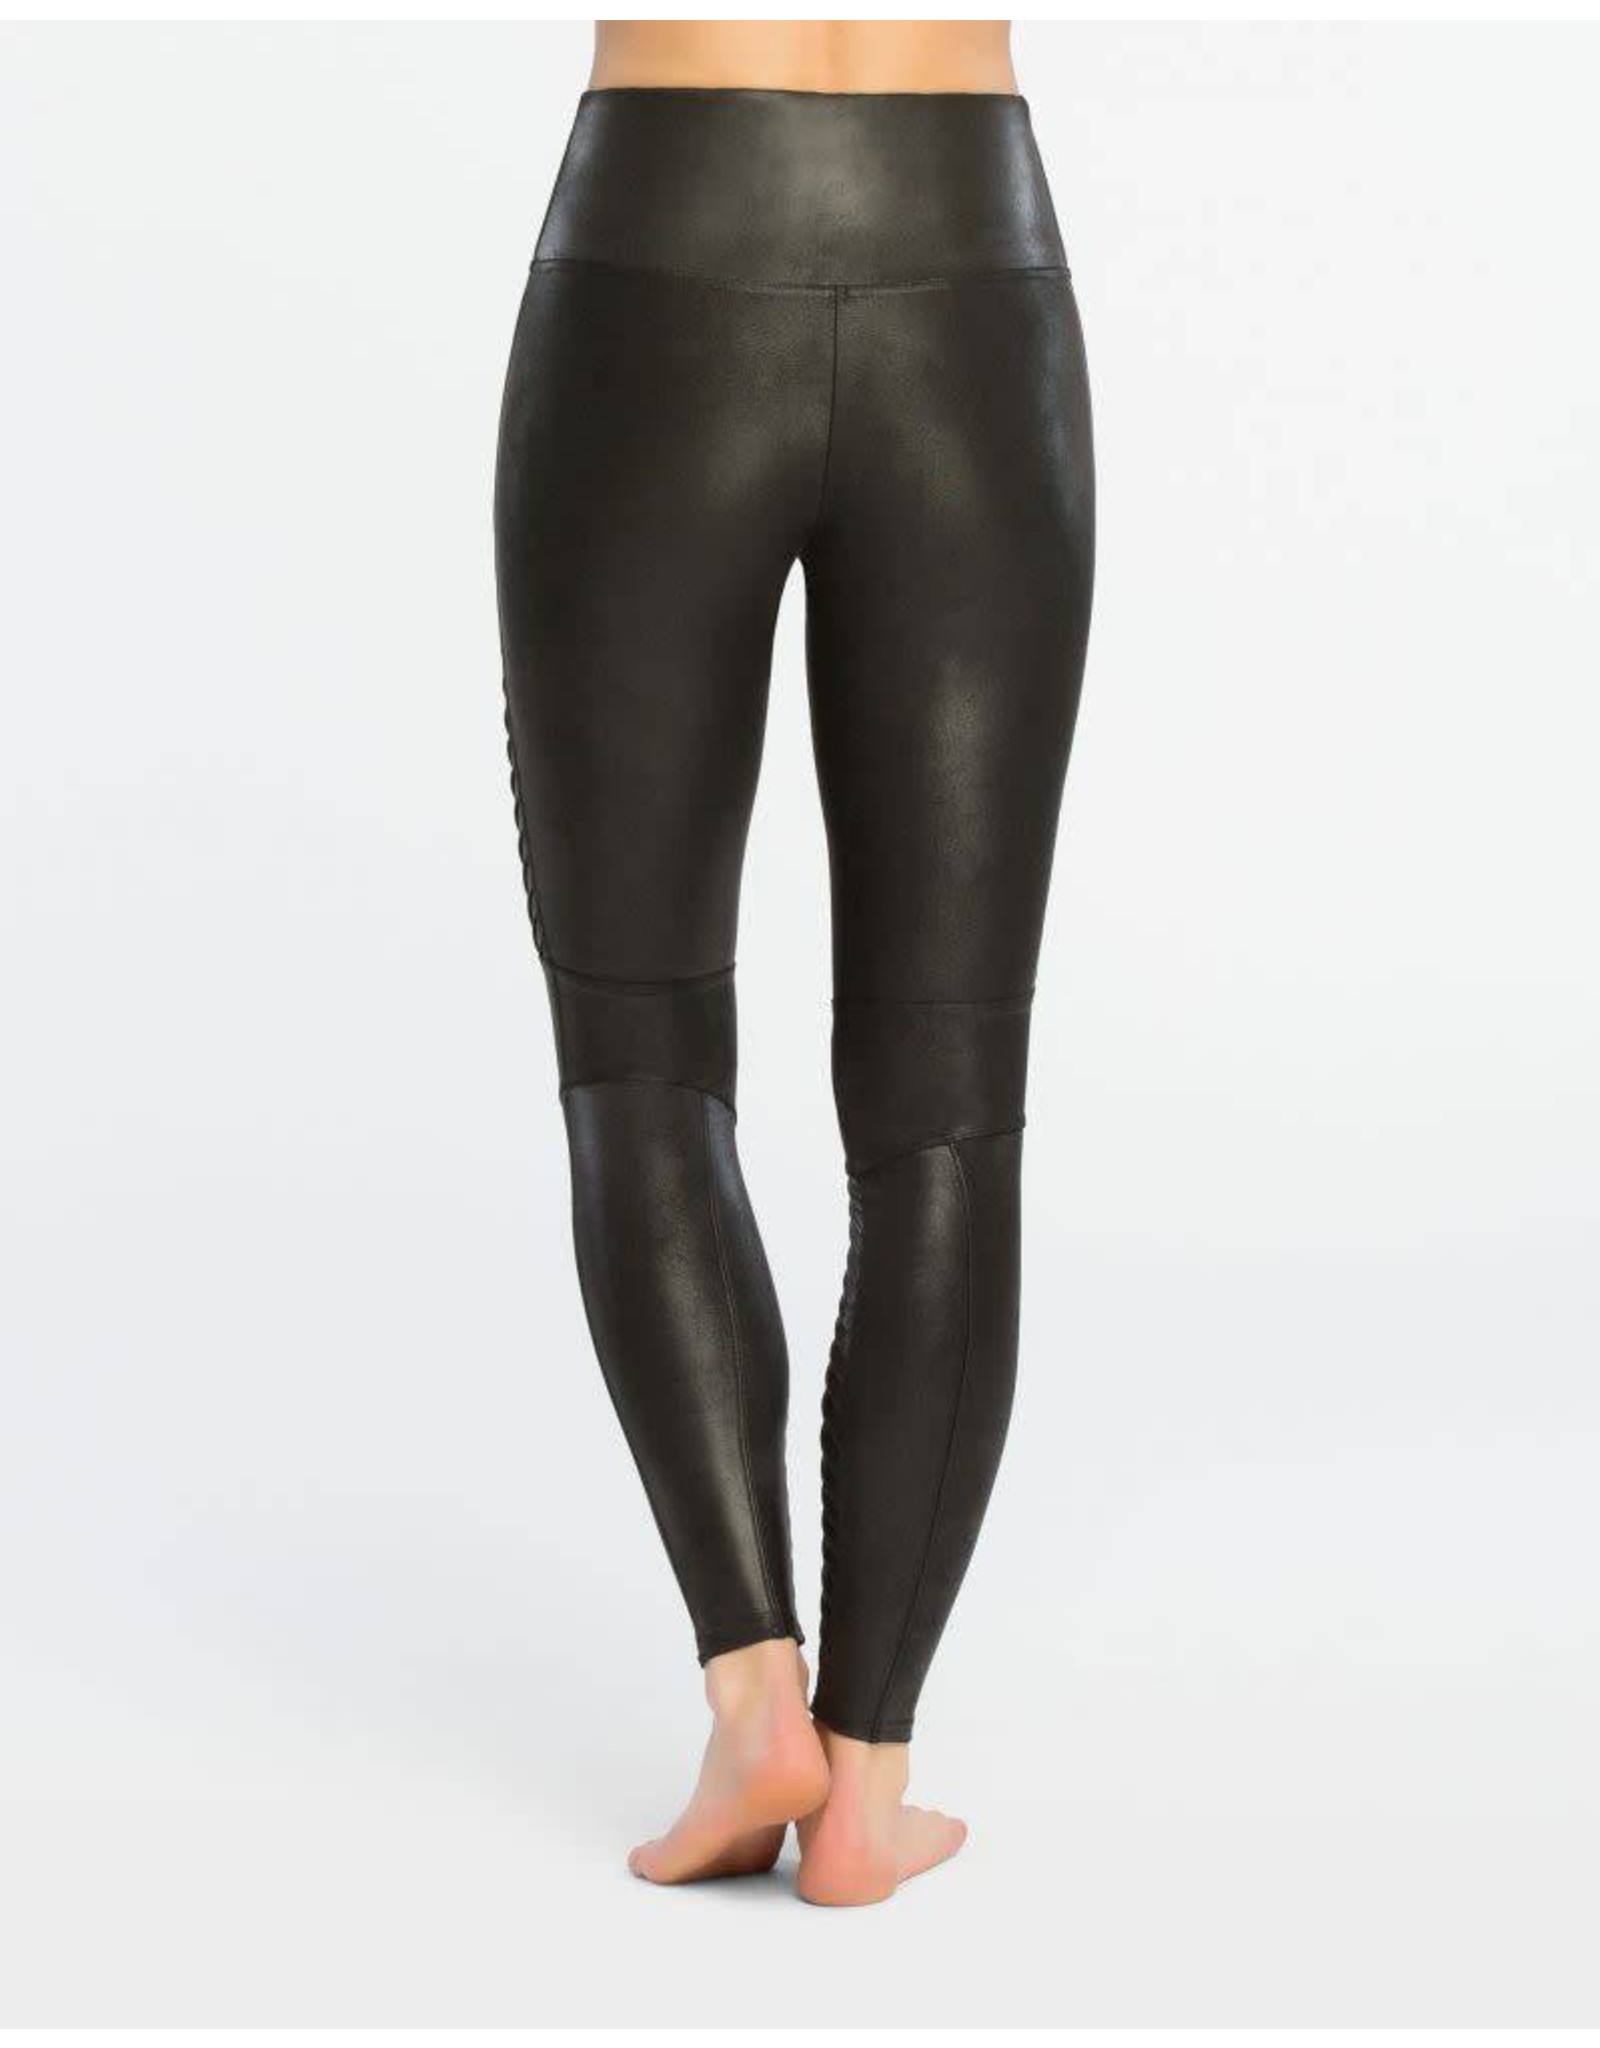 SPANX - Street style made easy with our Faux Leather Moto Leggings!  Available up to size 3X!